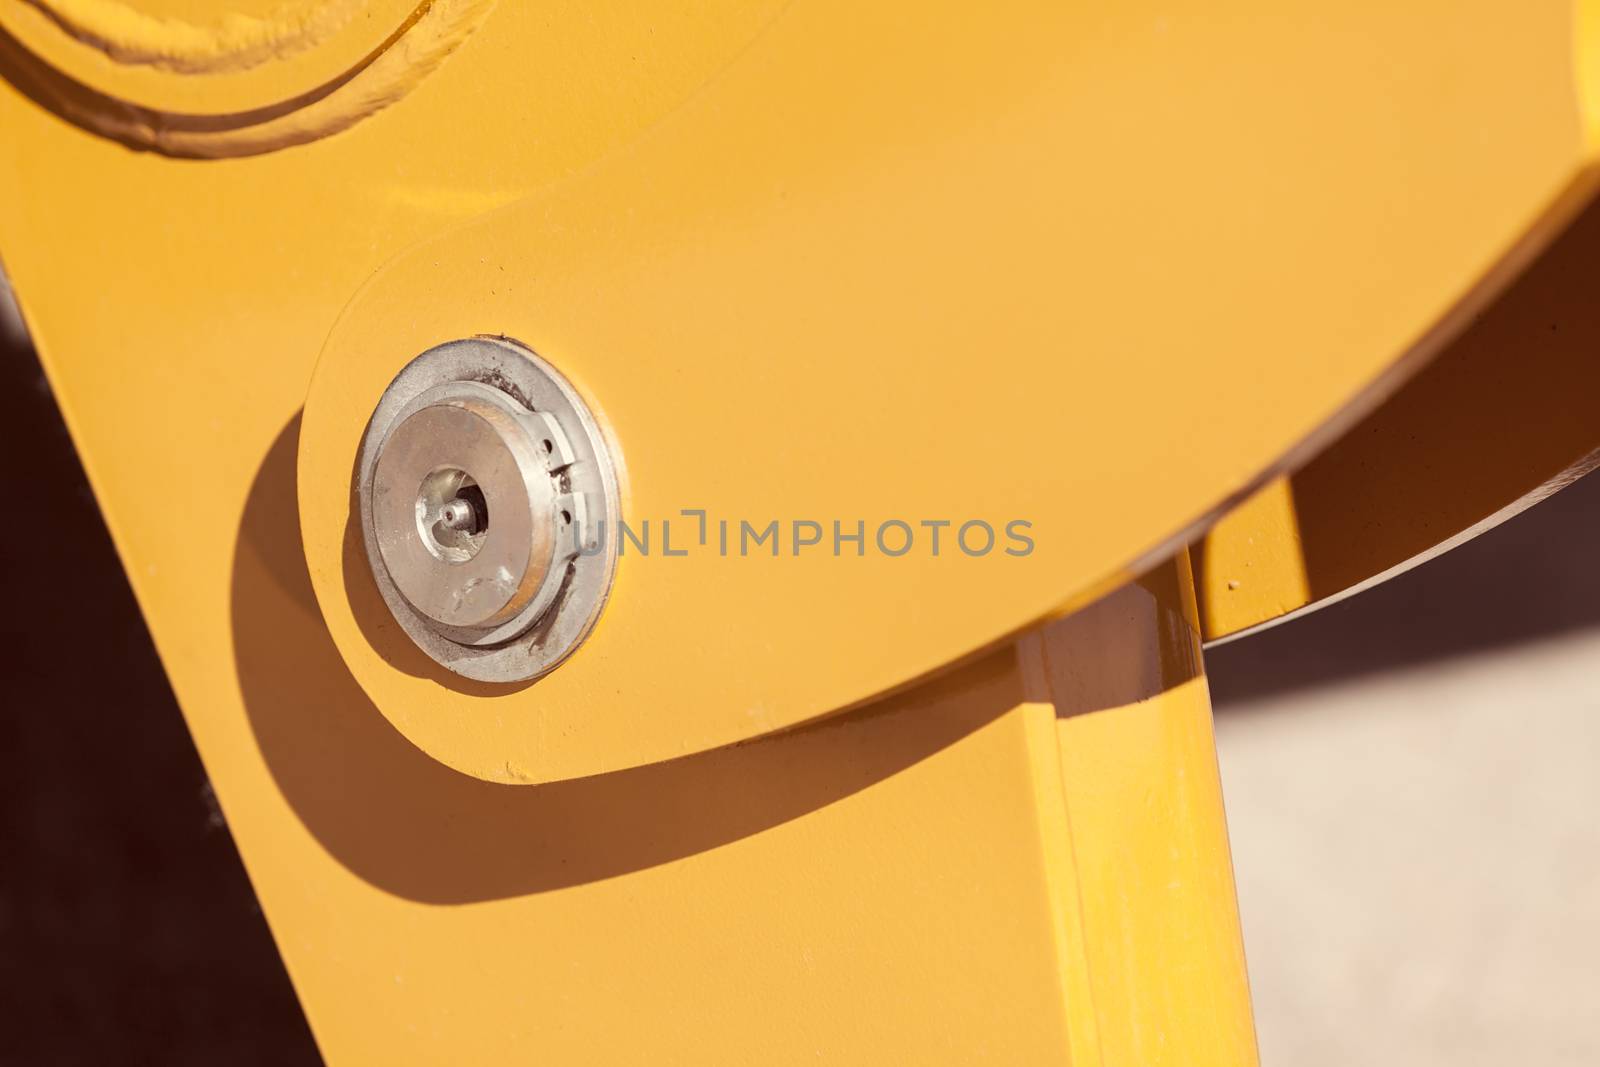 parts of machinery for the construction industry, note shallow depth of field